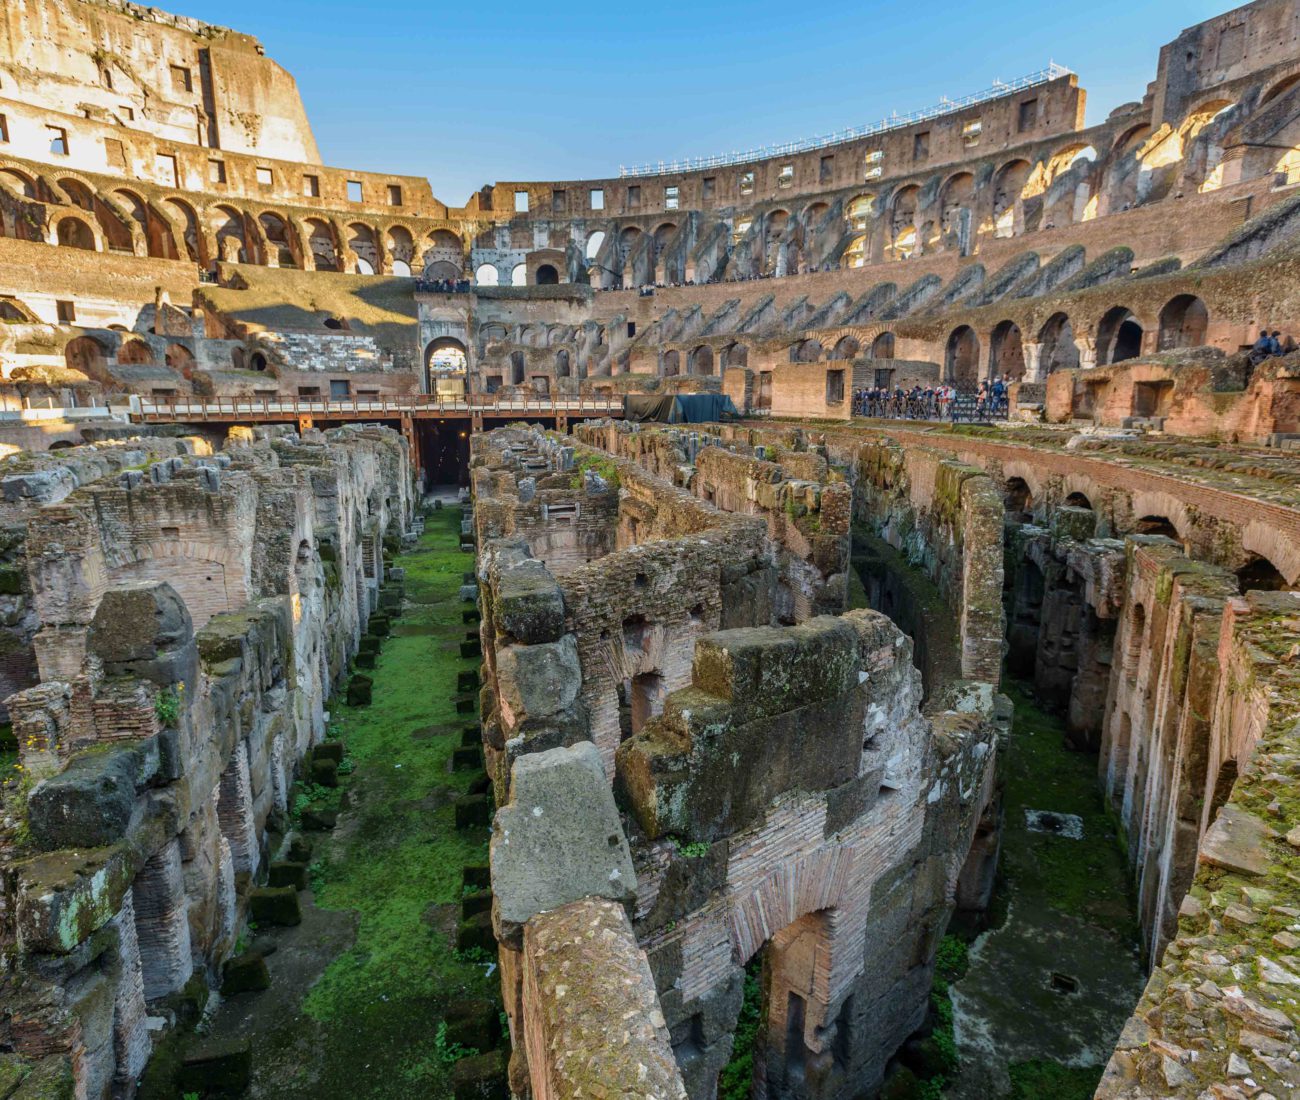 Rome Colosseum interiors are still fascinating as centuries ago when the Gladiators used to be the stars